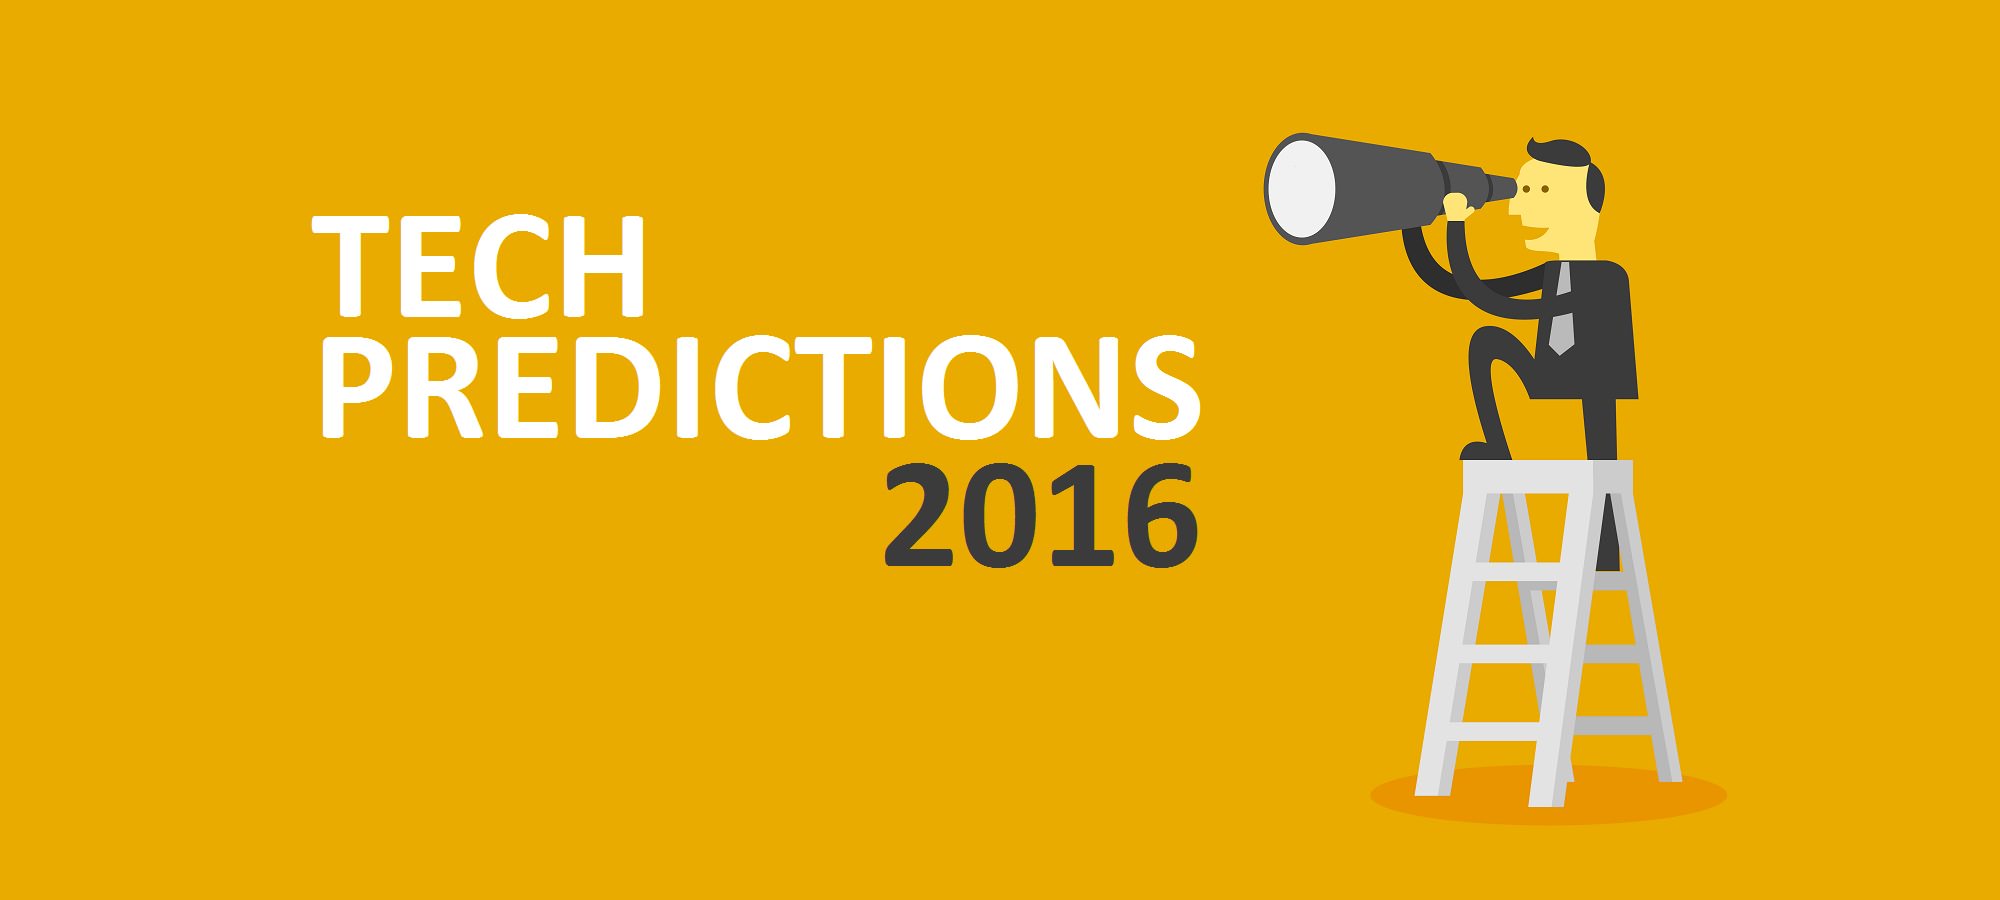 buyers predictions 2016 title